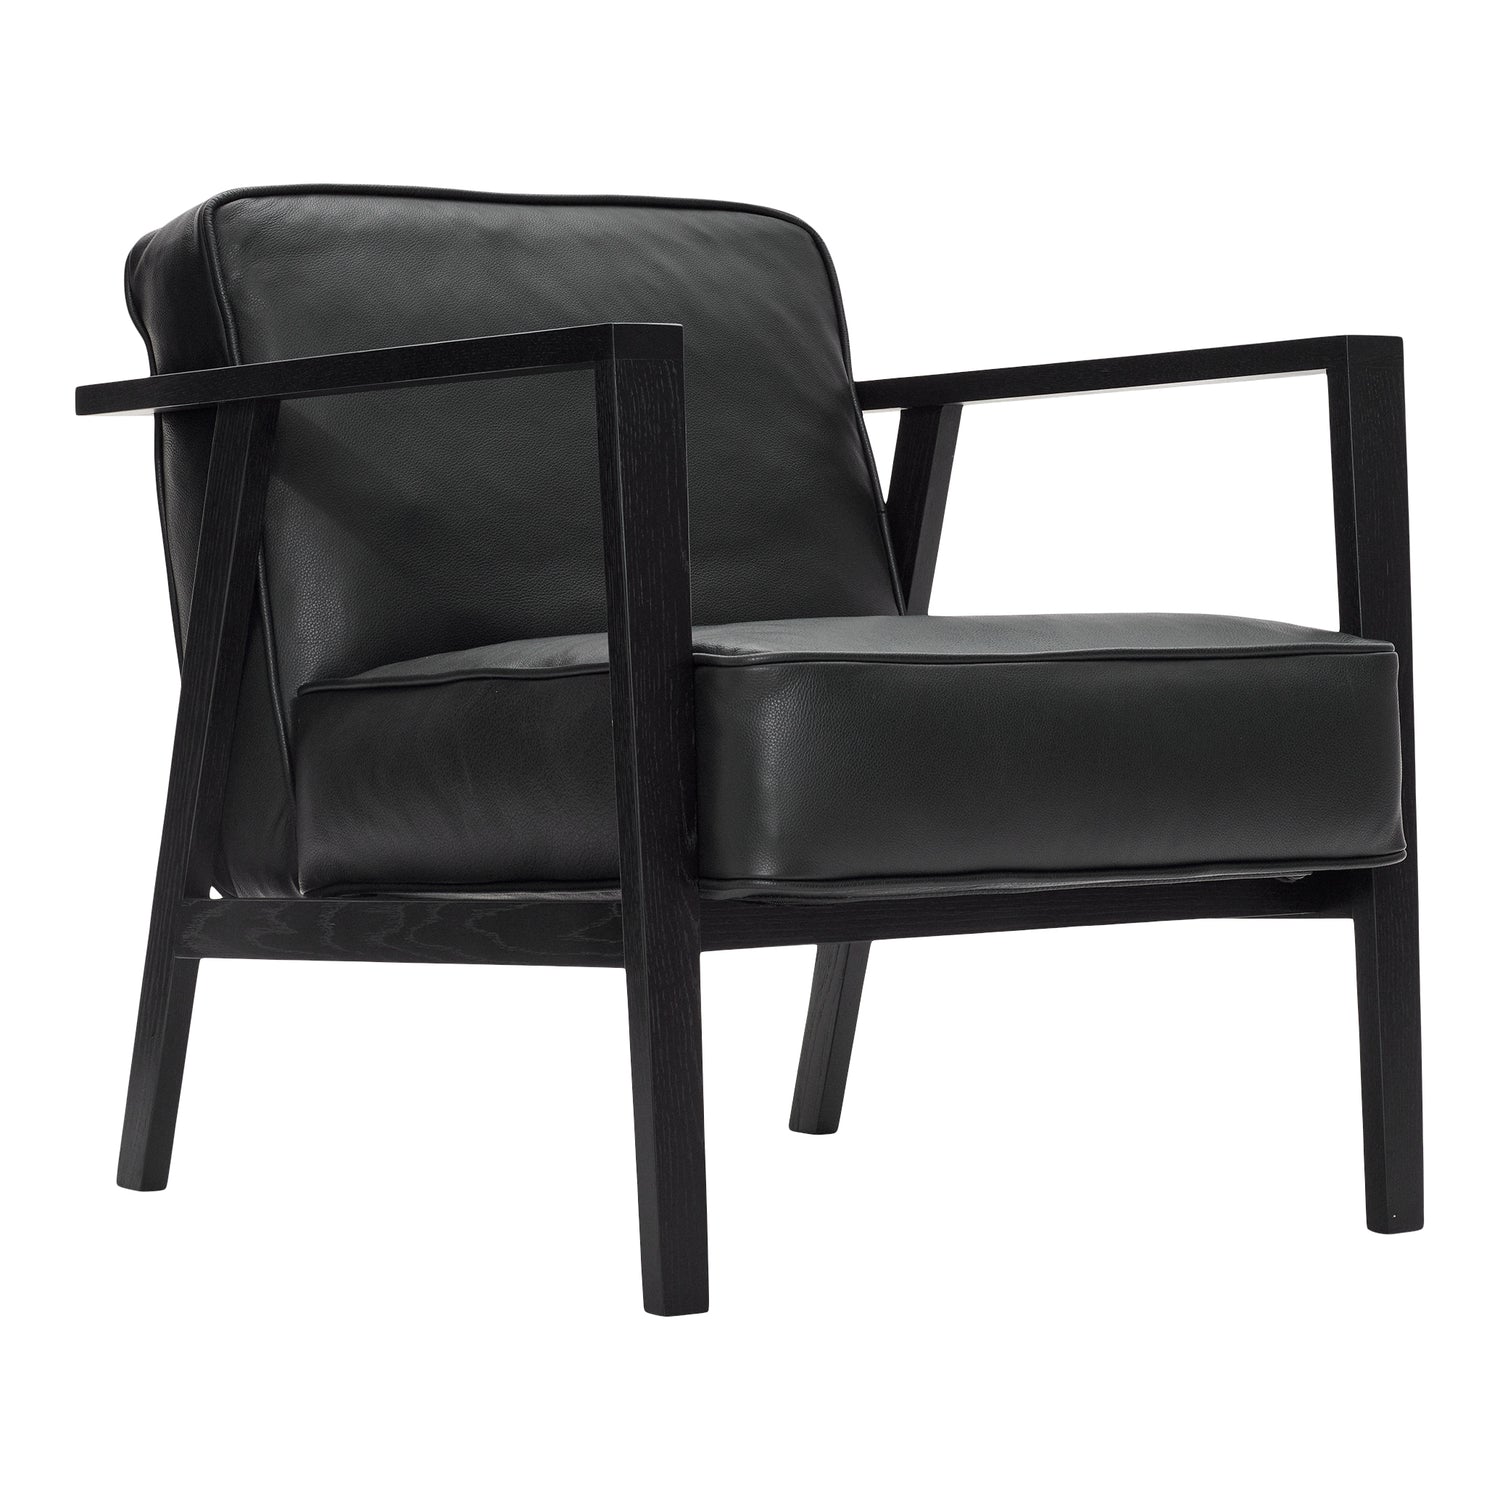 Andersen Furniture - LC1 Lounge Chair - Black Leather/Frame In Black Lacquer